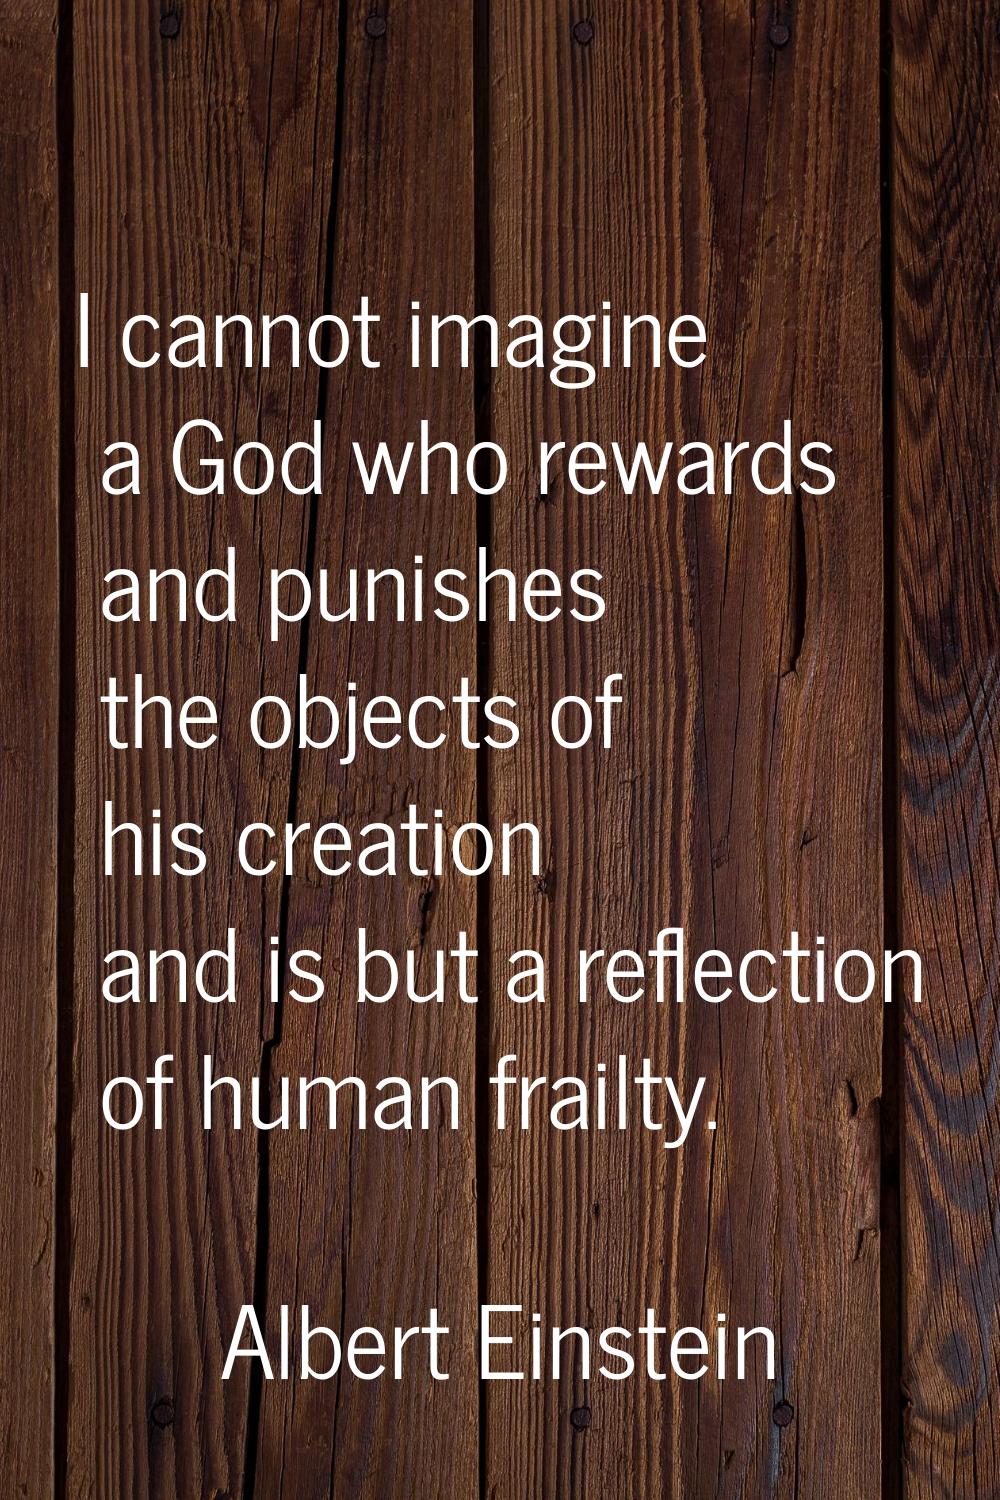 I cannot imagine a God who rewards and punishes the objects of his creation and is but a reflection